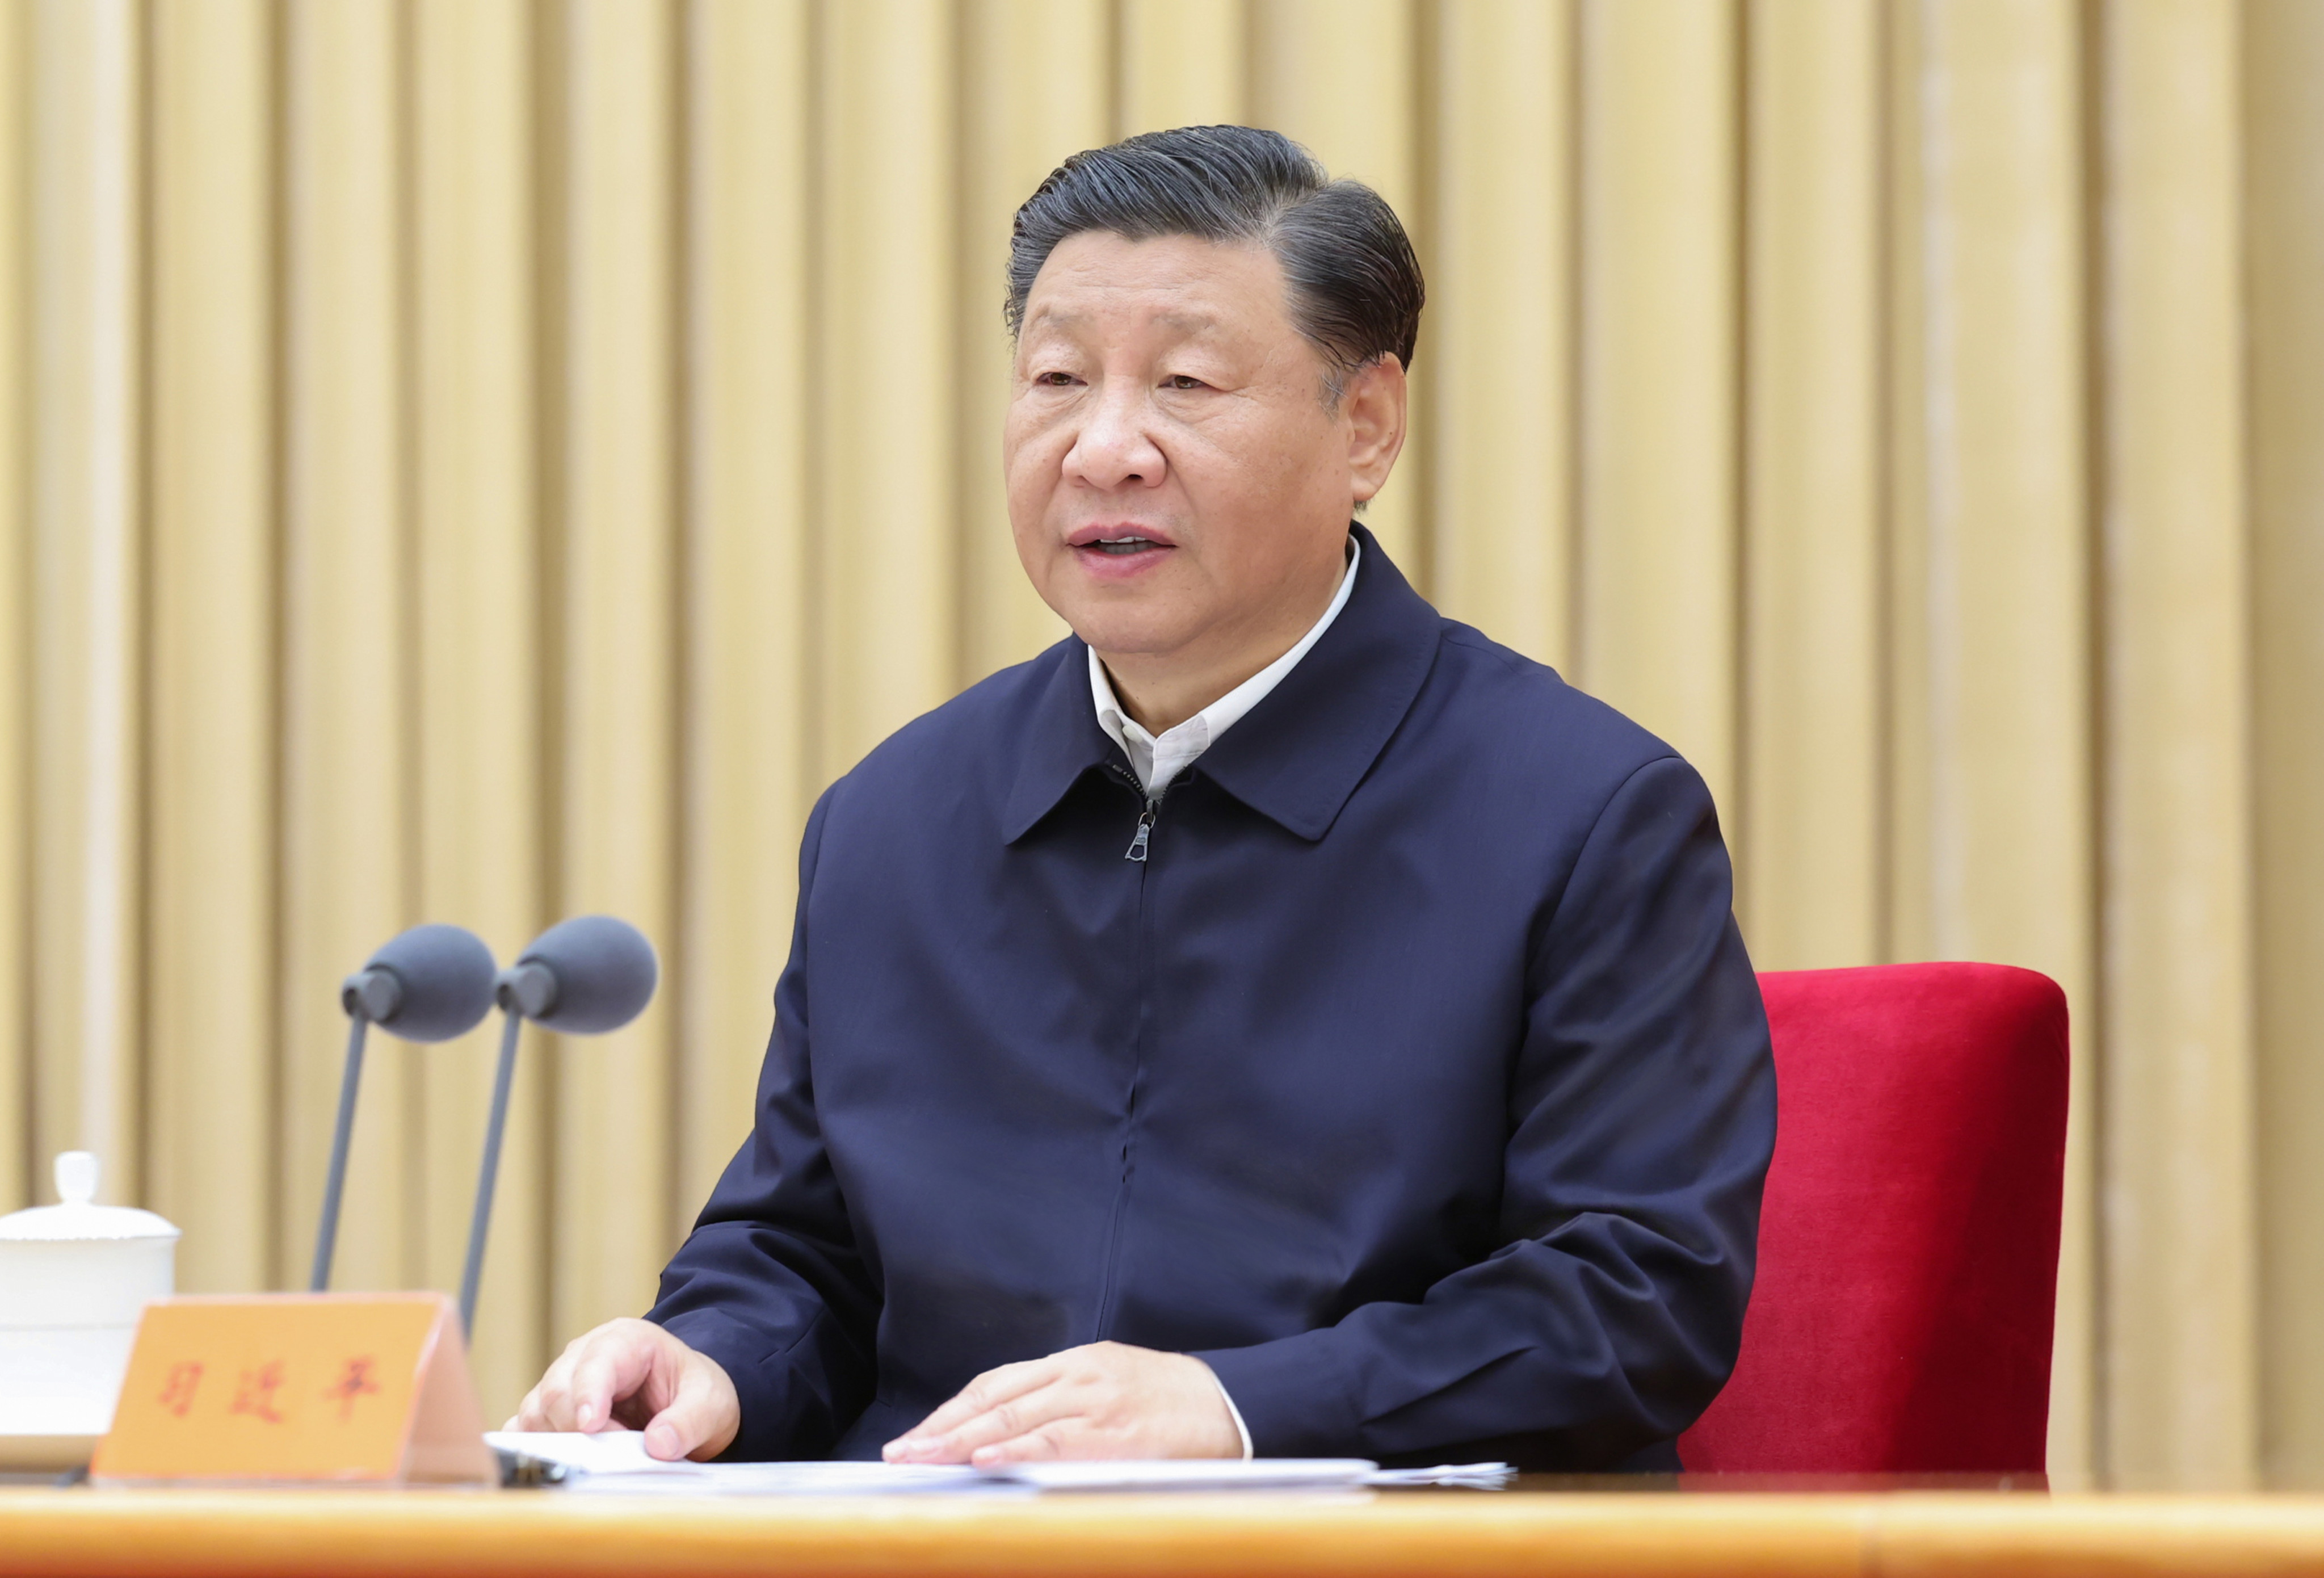 President Xi Jinping during the national financial work conference. Photo: Xinhua